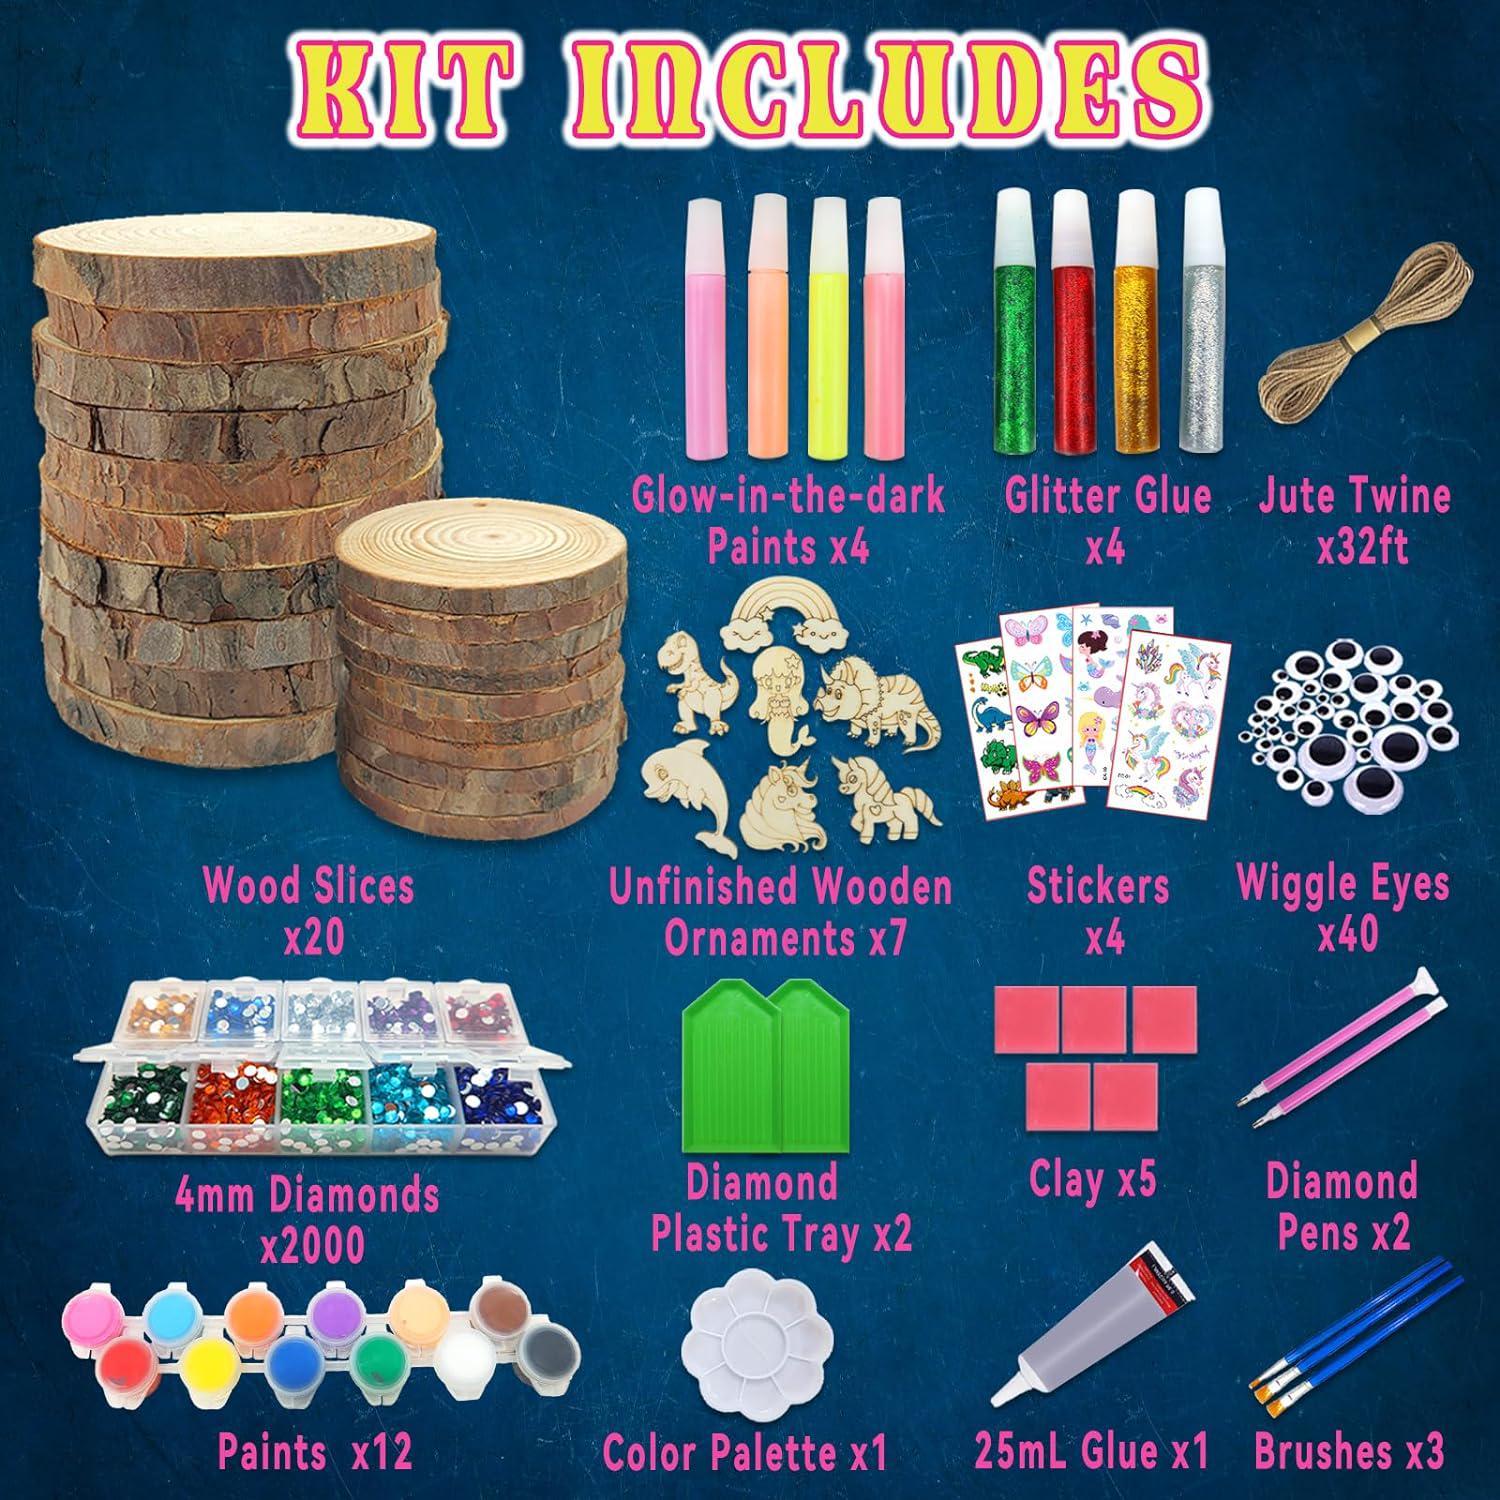 Arts and Crafts Supplies for Kids - 1600+Pcs Craft Kits for Kids - DIY  School Craft Project for Kids Age 4 5 6 7 8-12 Gifts for Girls and Boys  Crafts